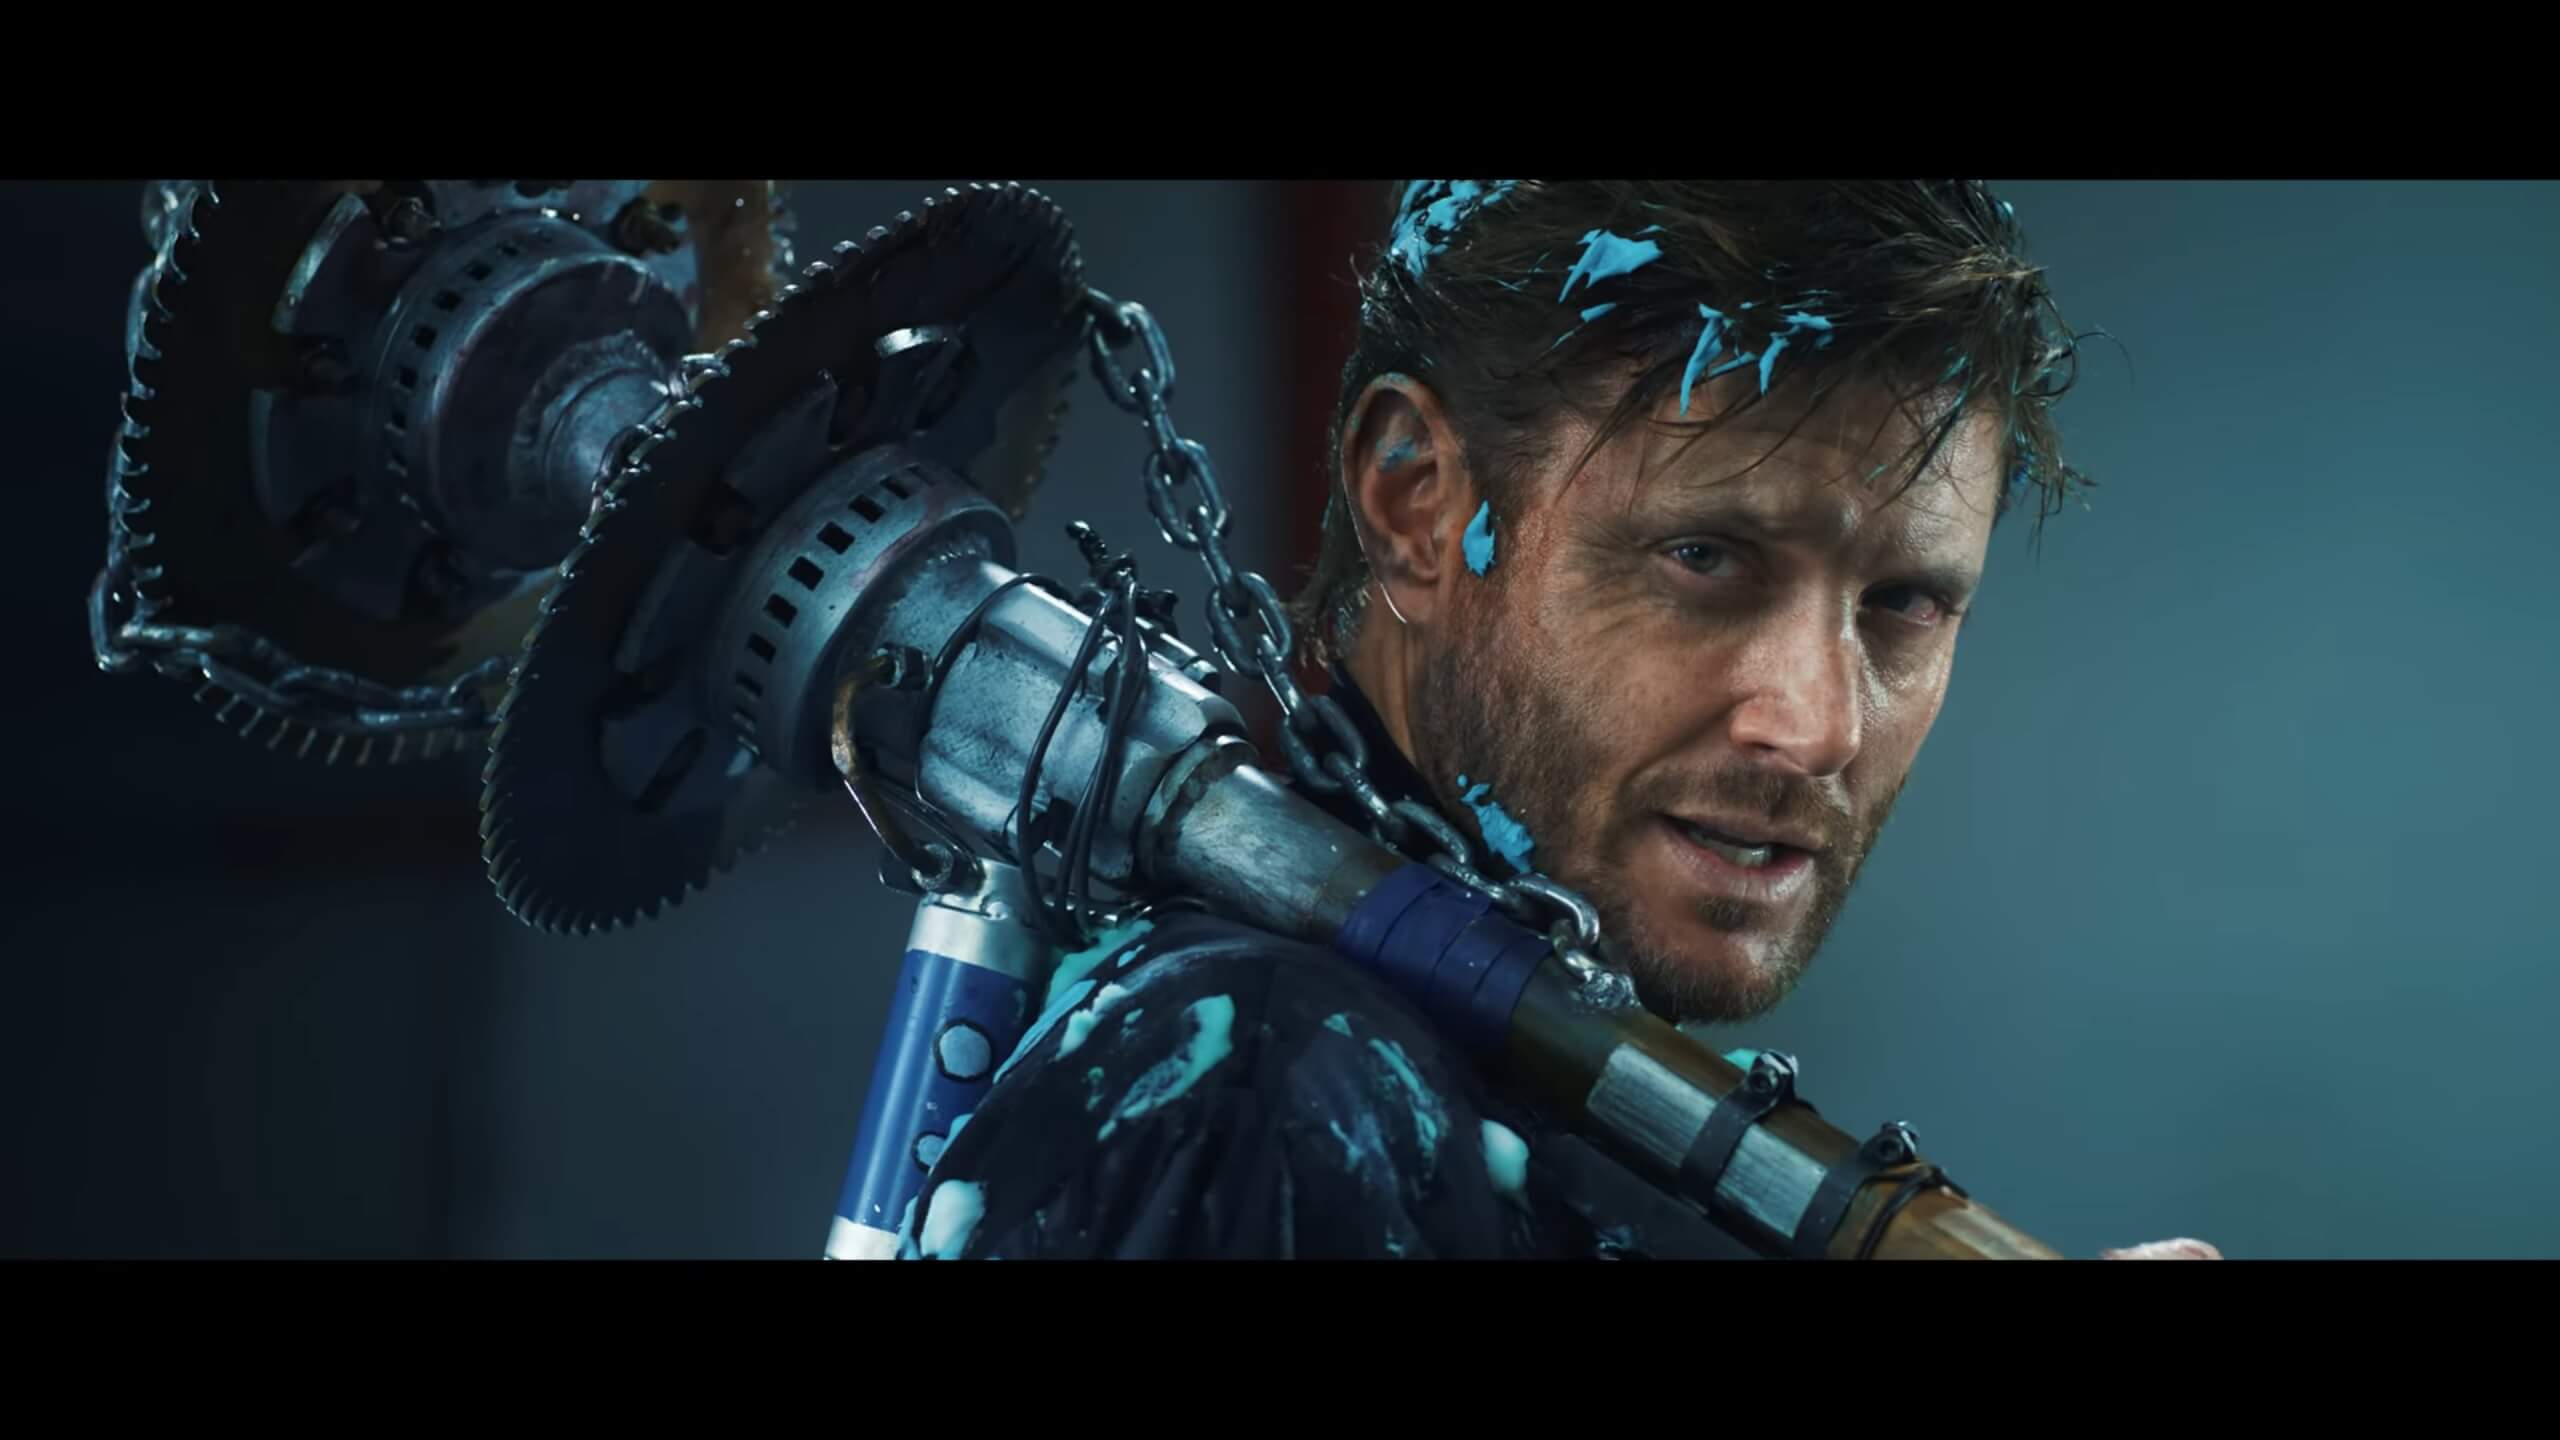 Atomic Heart gets a live-action trailer with Supernatural's Jensen Ackles